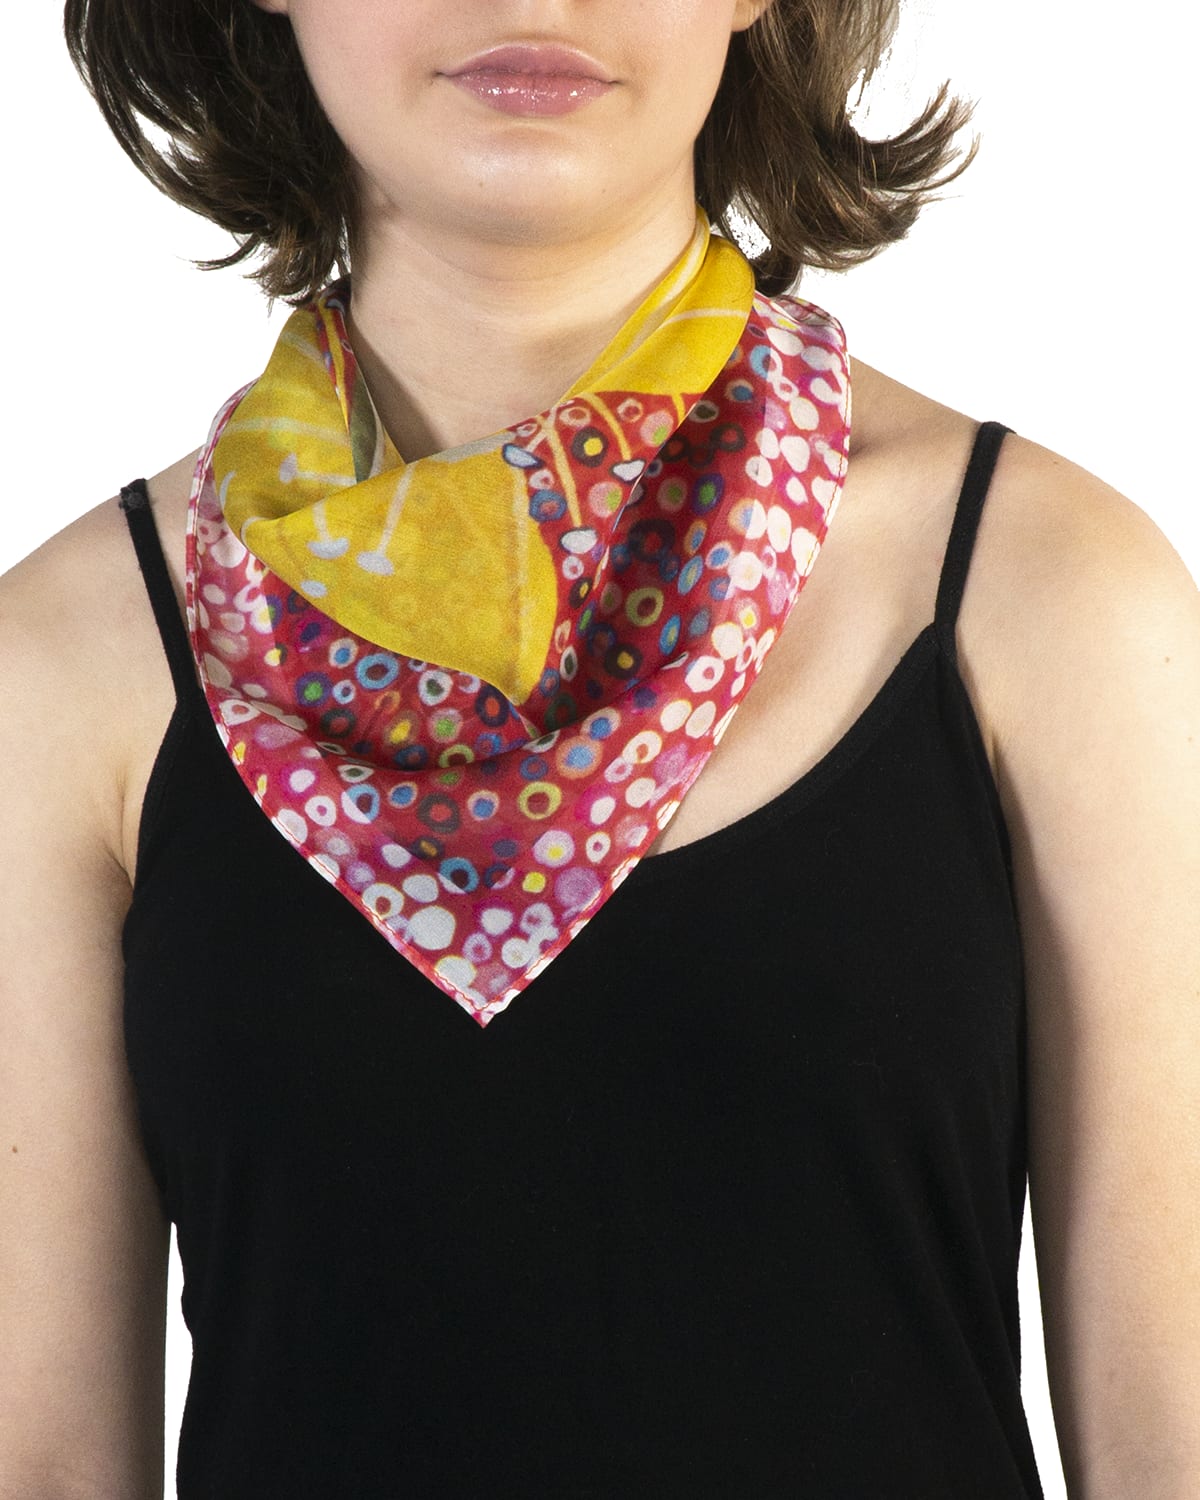 Woman's Fashion Fall Scarf-Abstract Floral Print White italian Modal Scarf 